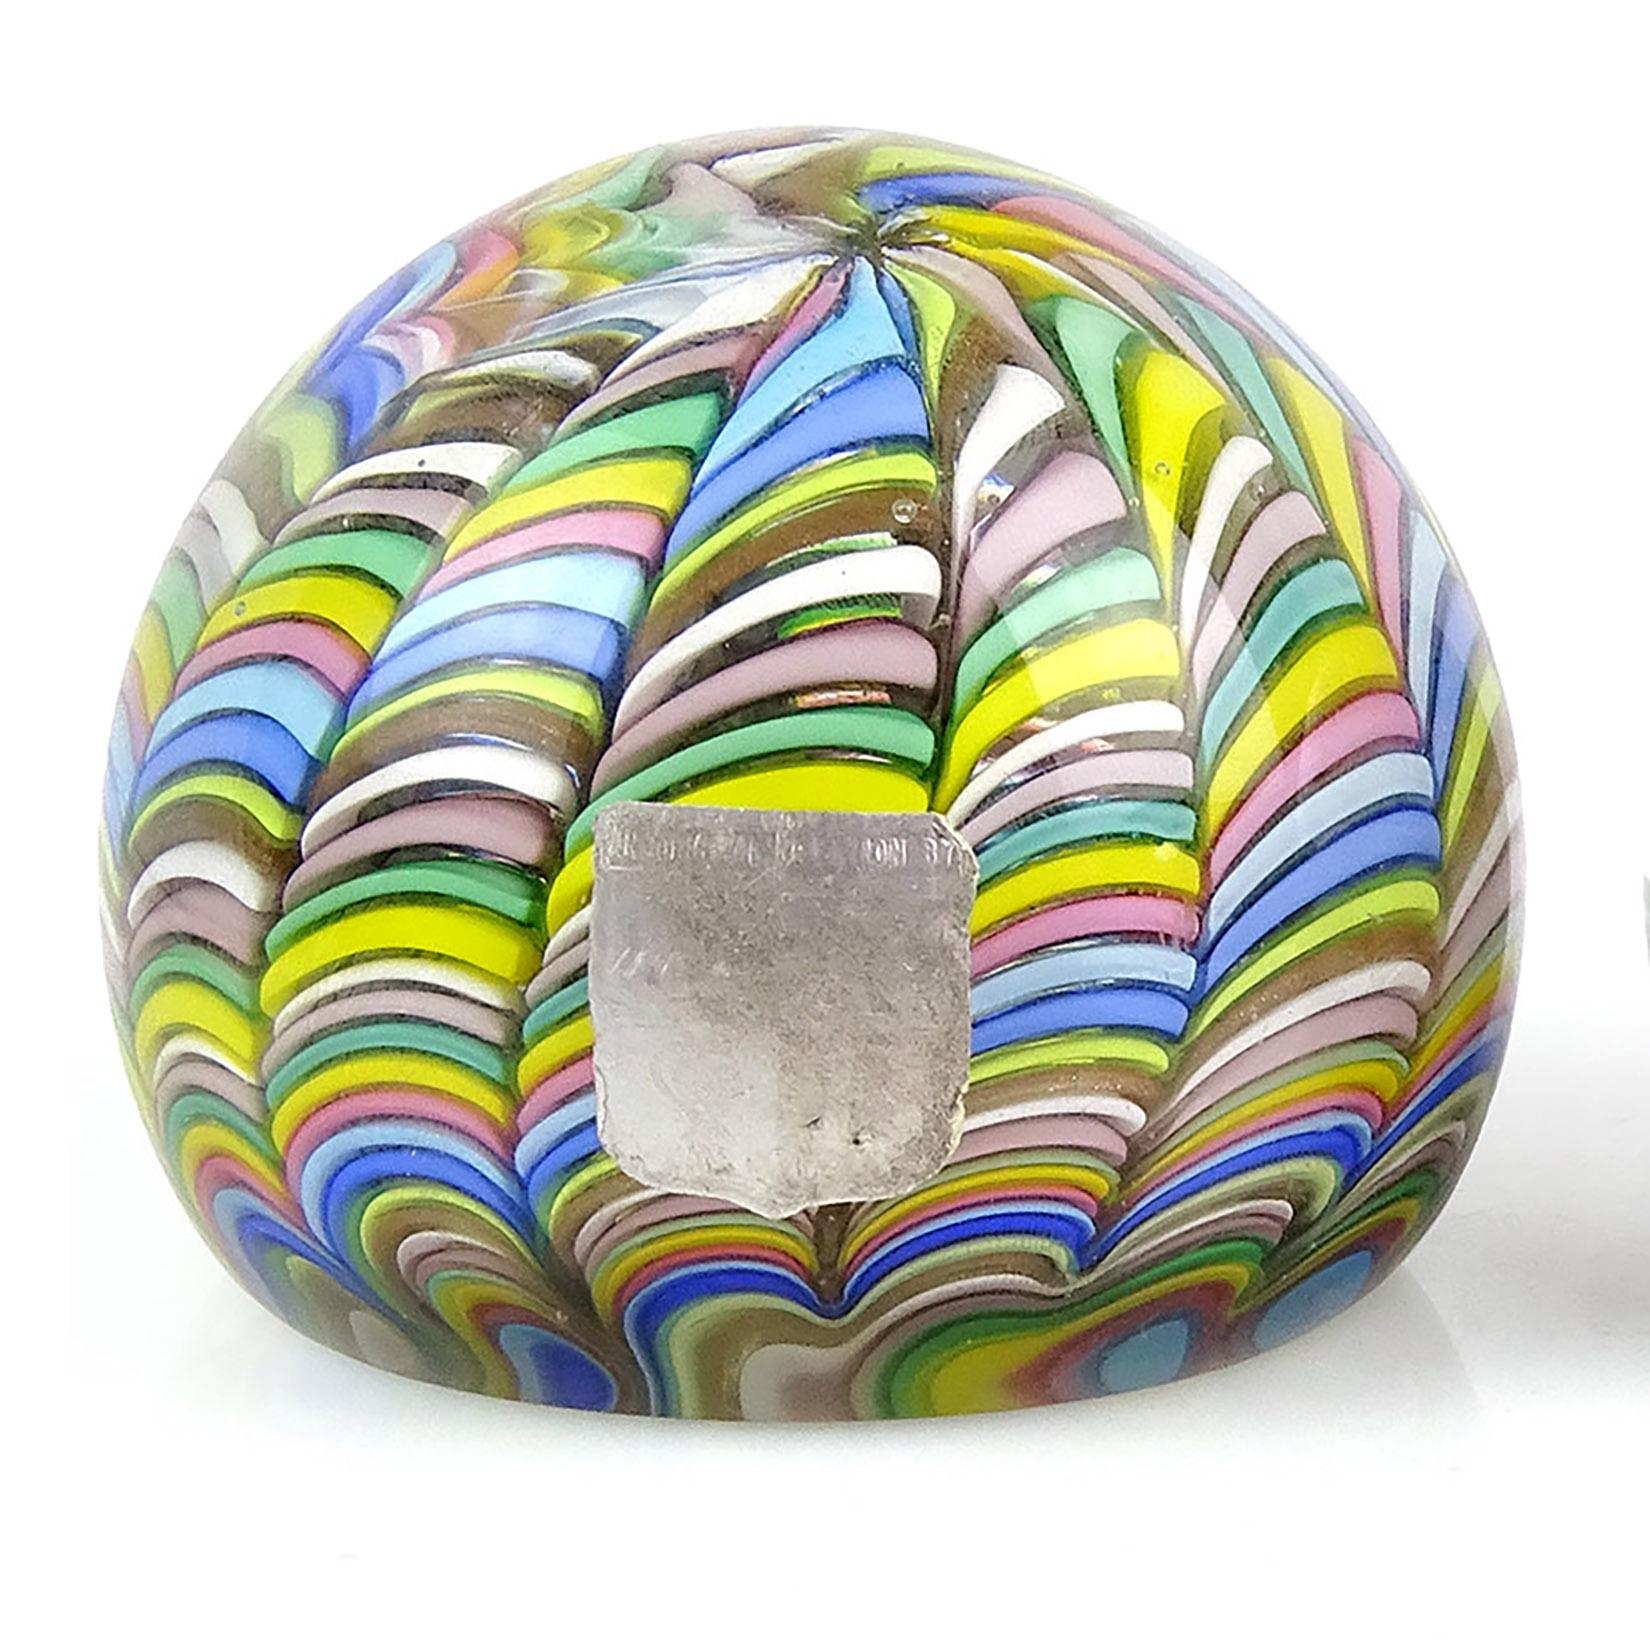 Beautiful vintage Murano hand blown rainbow stripe ribbons Italian art glass paperweight. Documented to the Fratelli Toso Company. It has alternating pink, white, blue, aqua, green, yellow, orange, and copper aventurine stripes. There is a worn